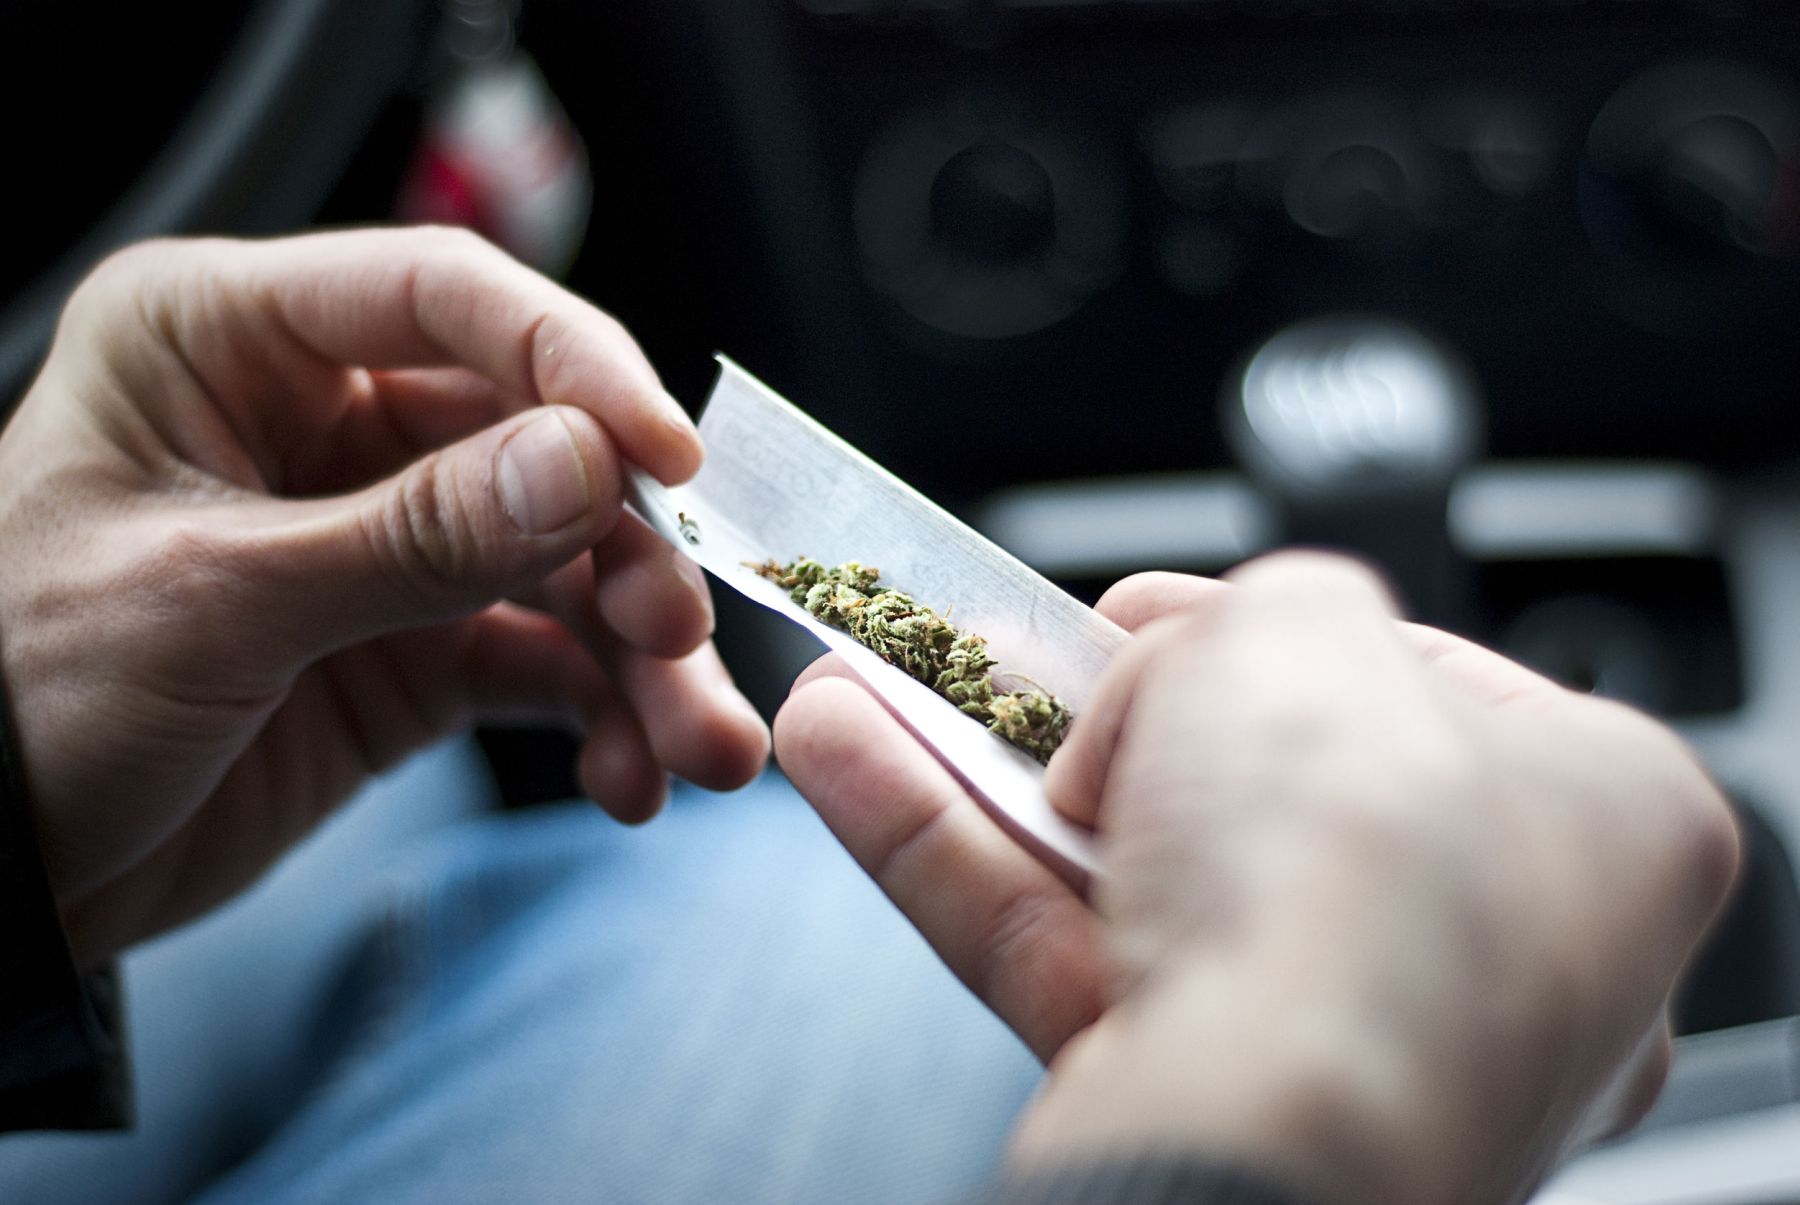 59953123 - man making joint and a stash of marijuana in the car